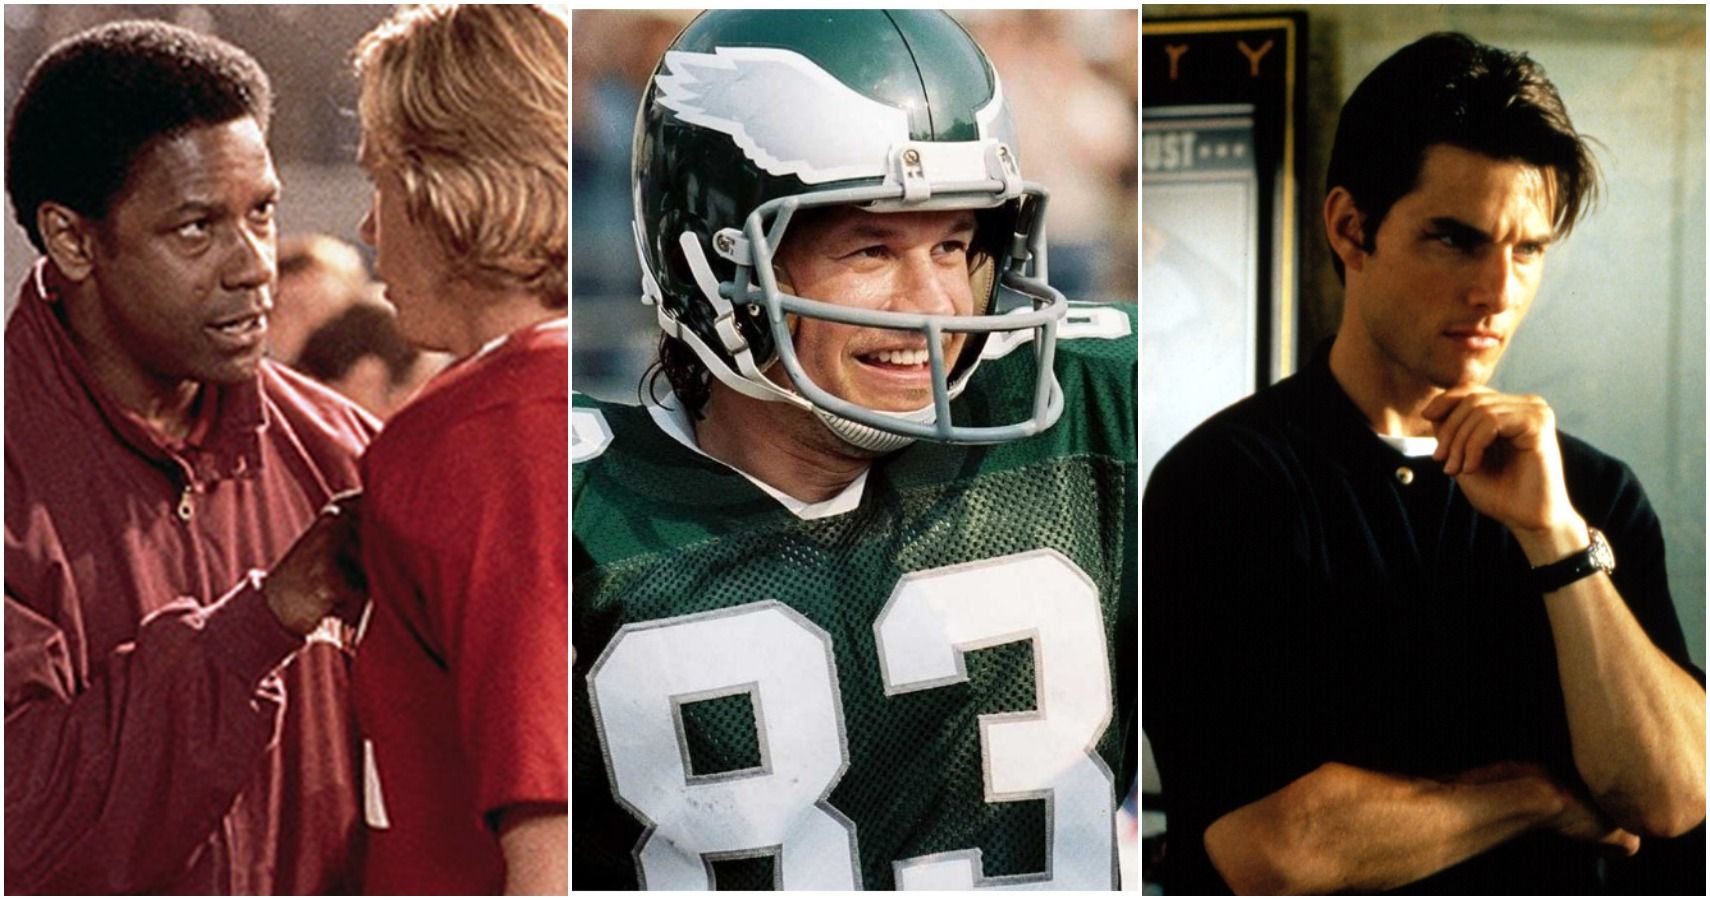 The 10 Best Football Movies Ever Made According to Rotten Tomatoes